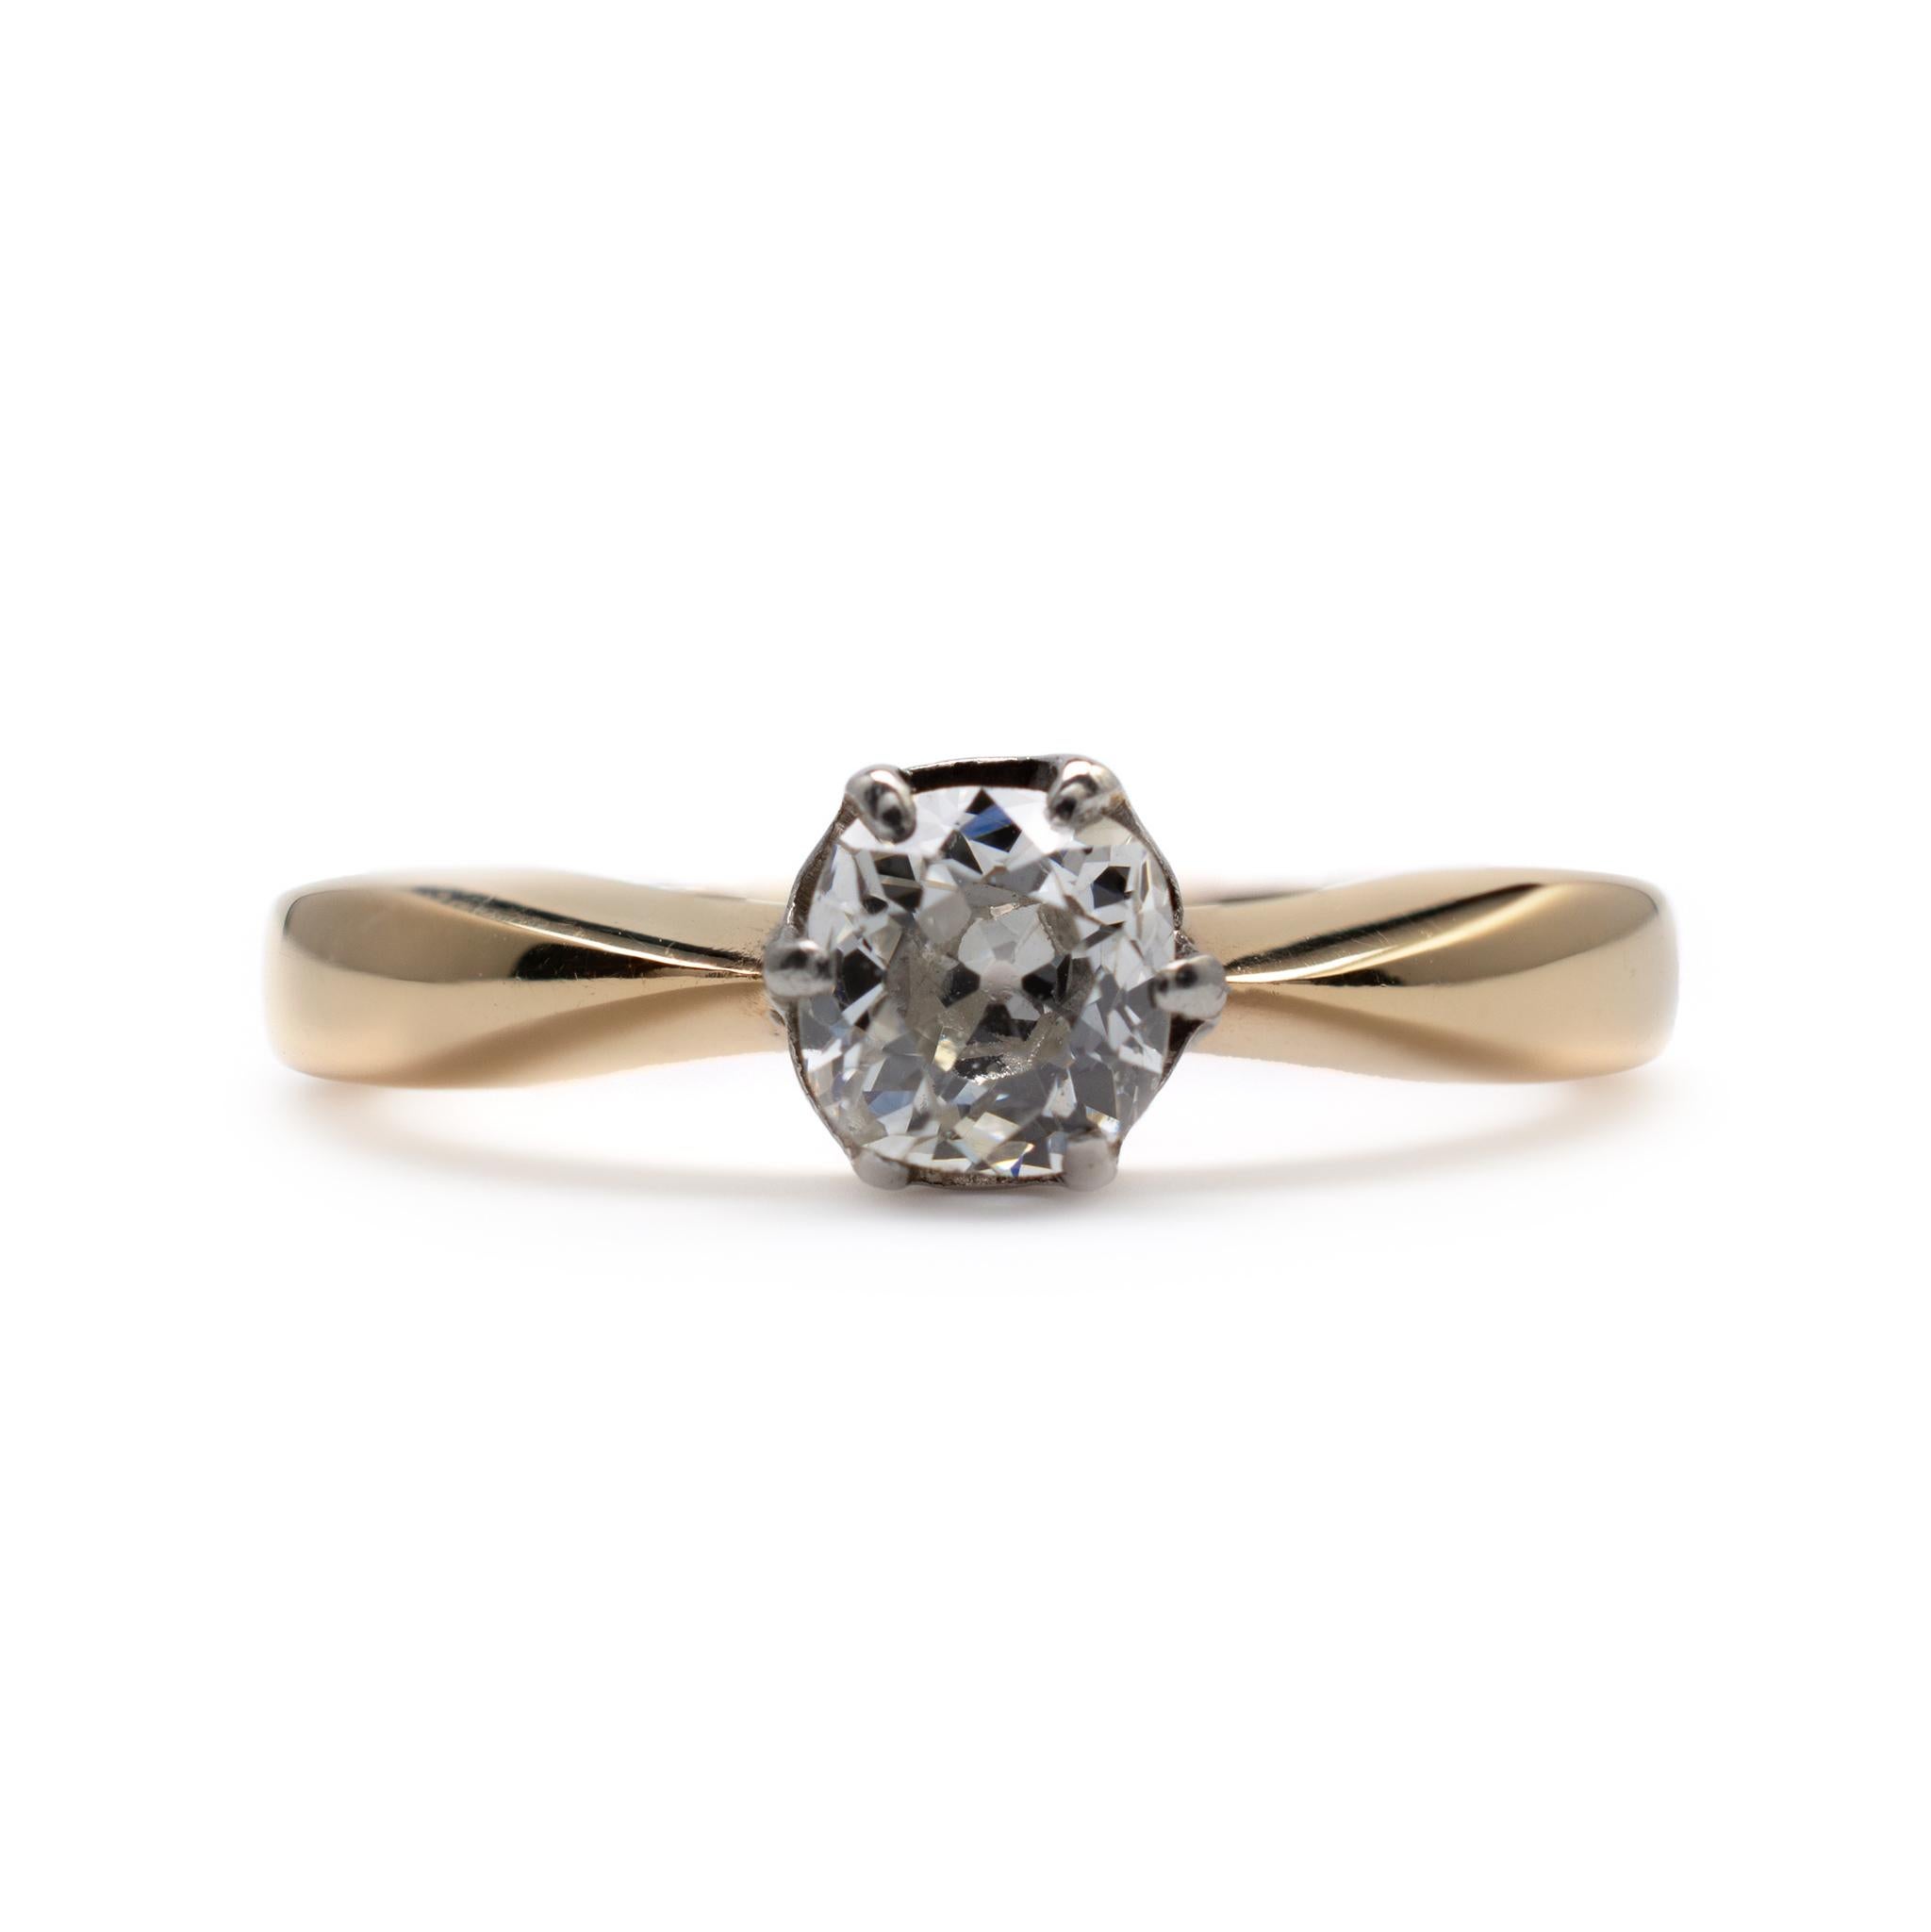 This diamond solitaire engagement ring is set with a cushion-cut 0.50-carat diamond.

Crafted in 18ct yellow gold, the shank has beveled edges with pinched reverse tapered shoulders. The diamond is neatly secured into a decorative rex style